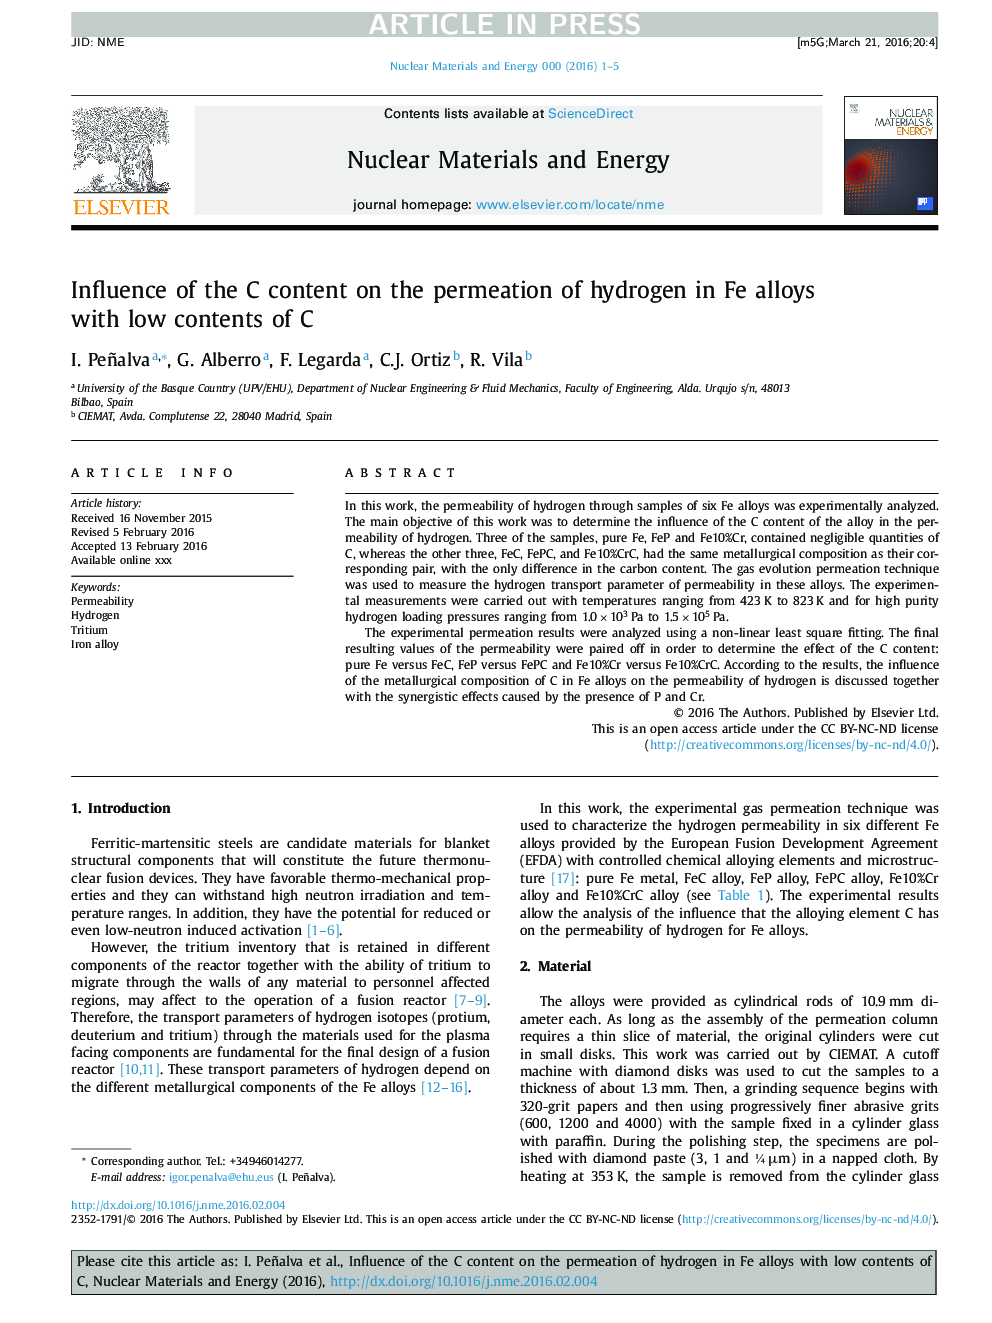 Influence of the C content on the permeation of hydrogen in Fe alloys with low contents of C